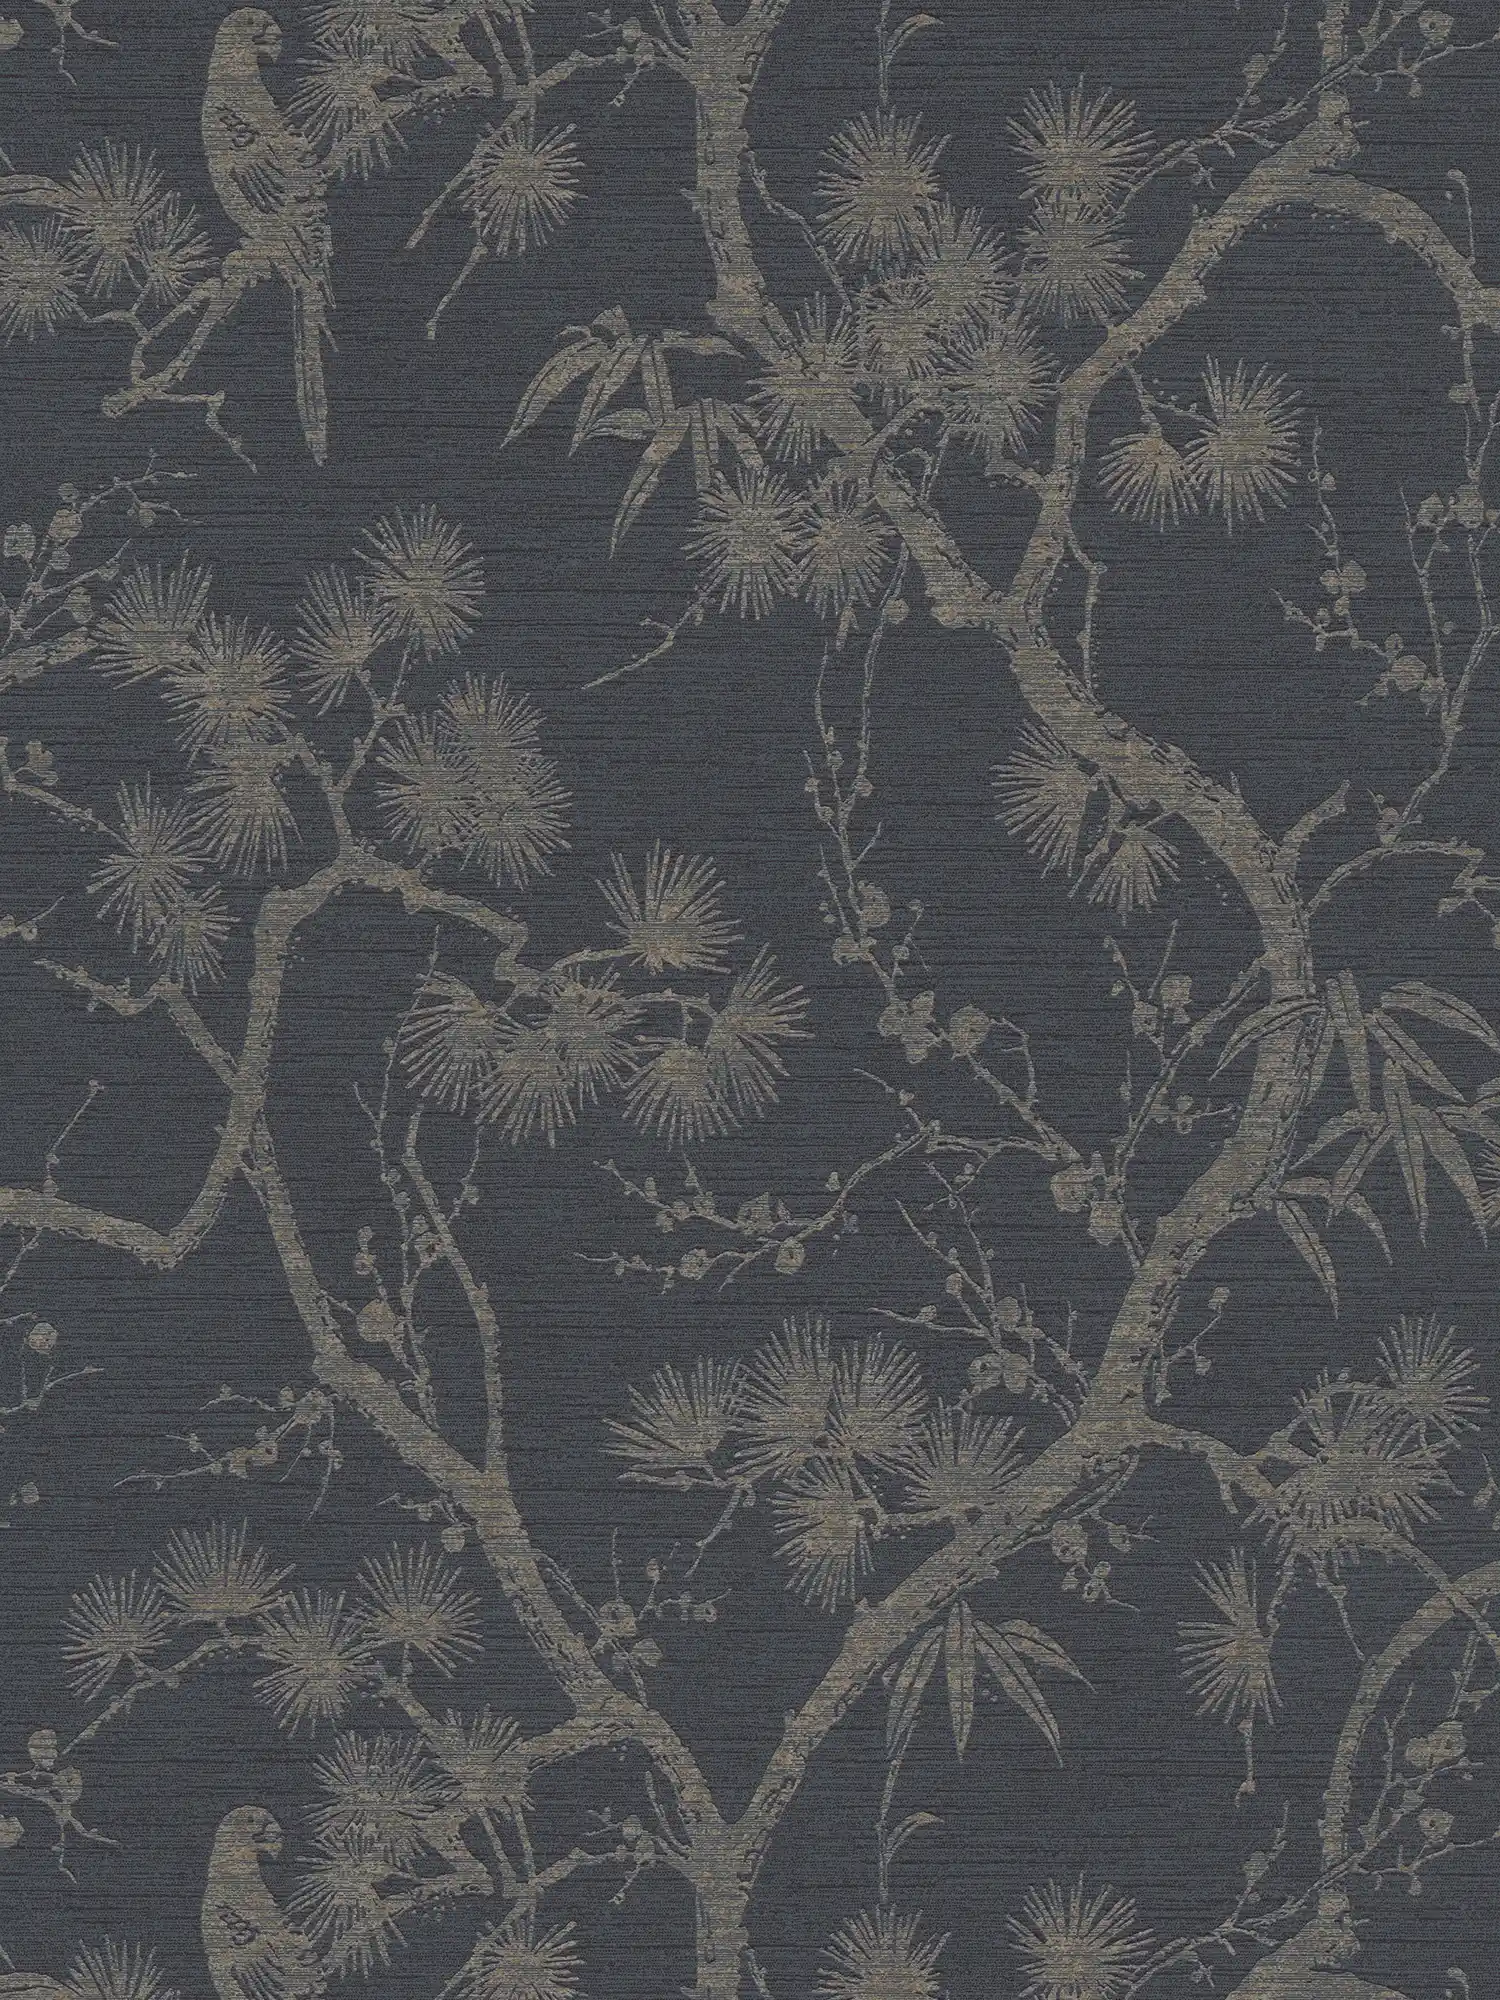 Non-woven wallpaper in Asian style with gold effect - grey, metallic, black
